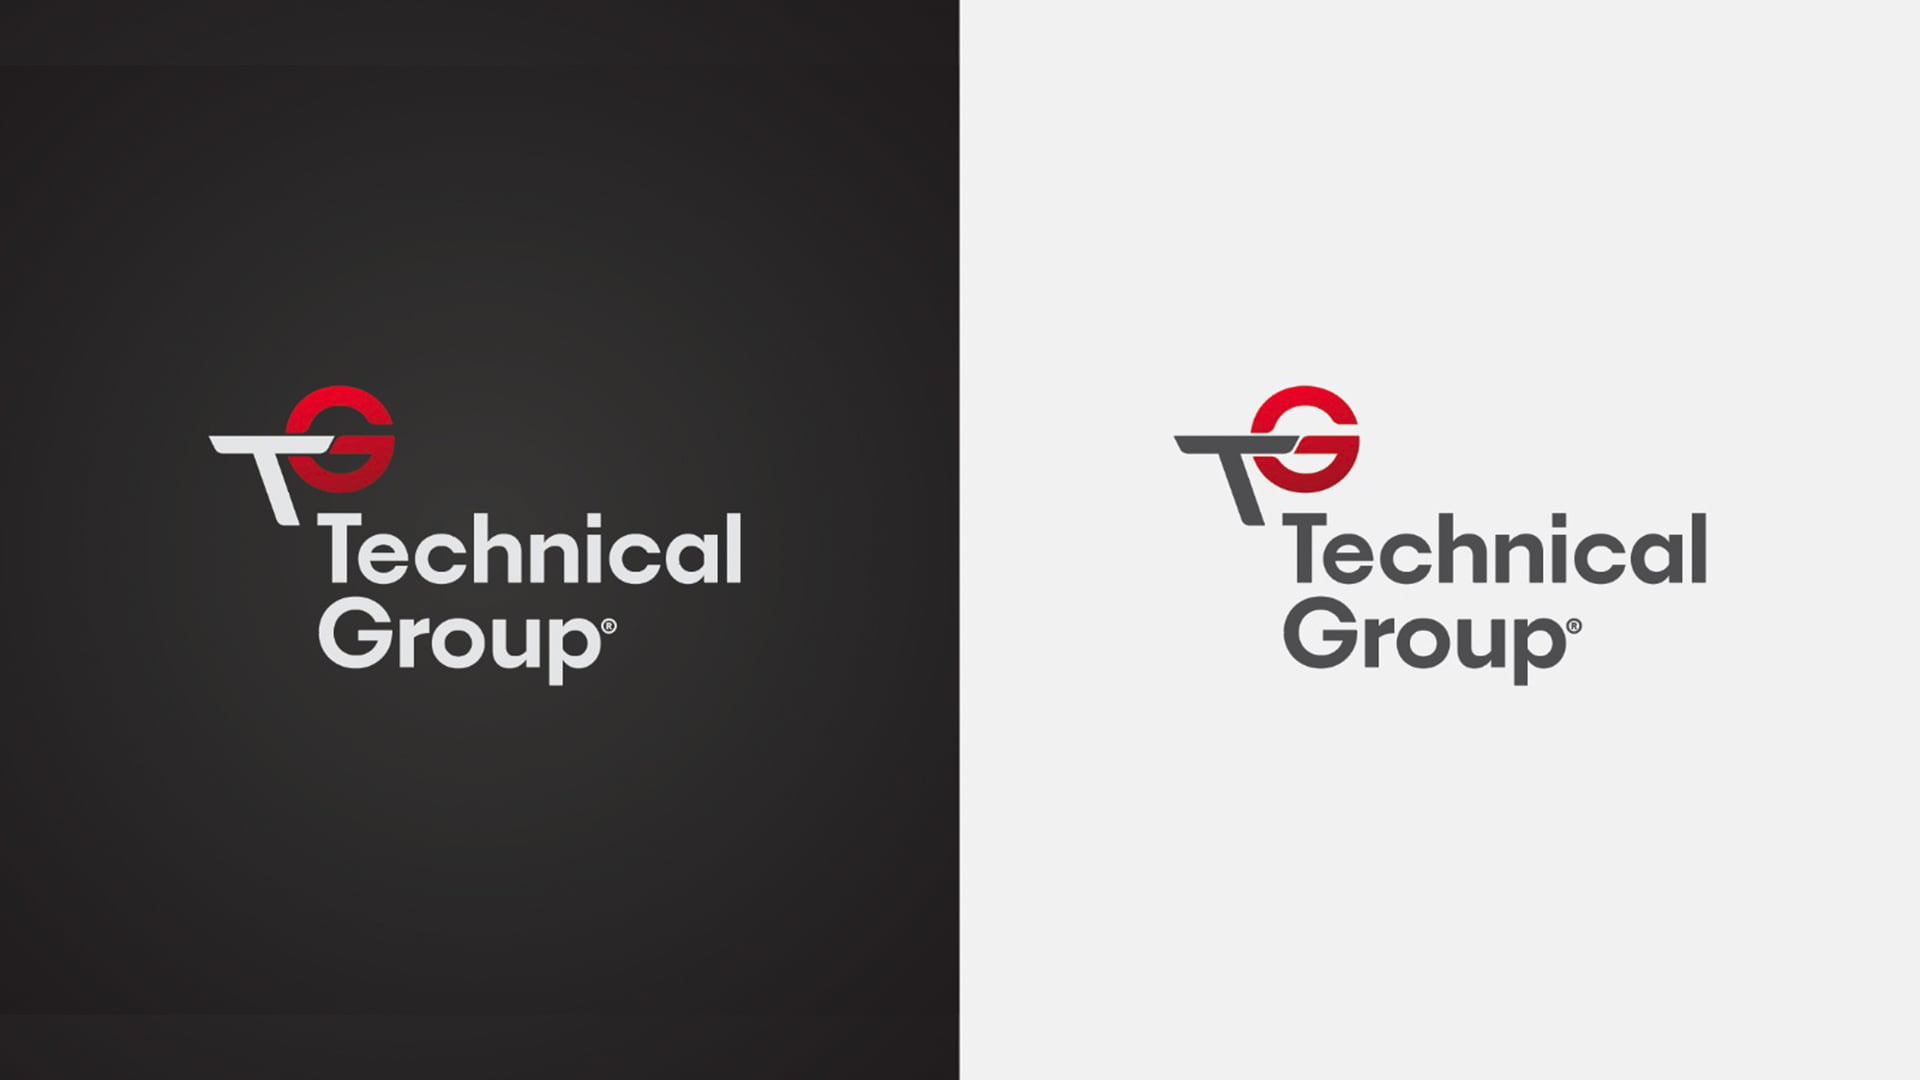 TG Technical Group